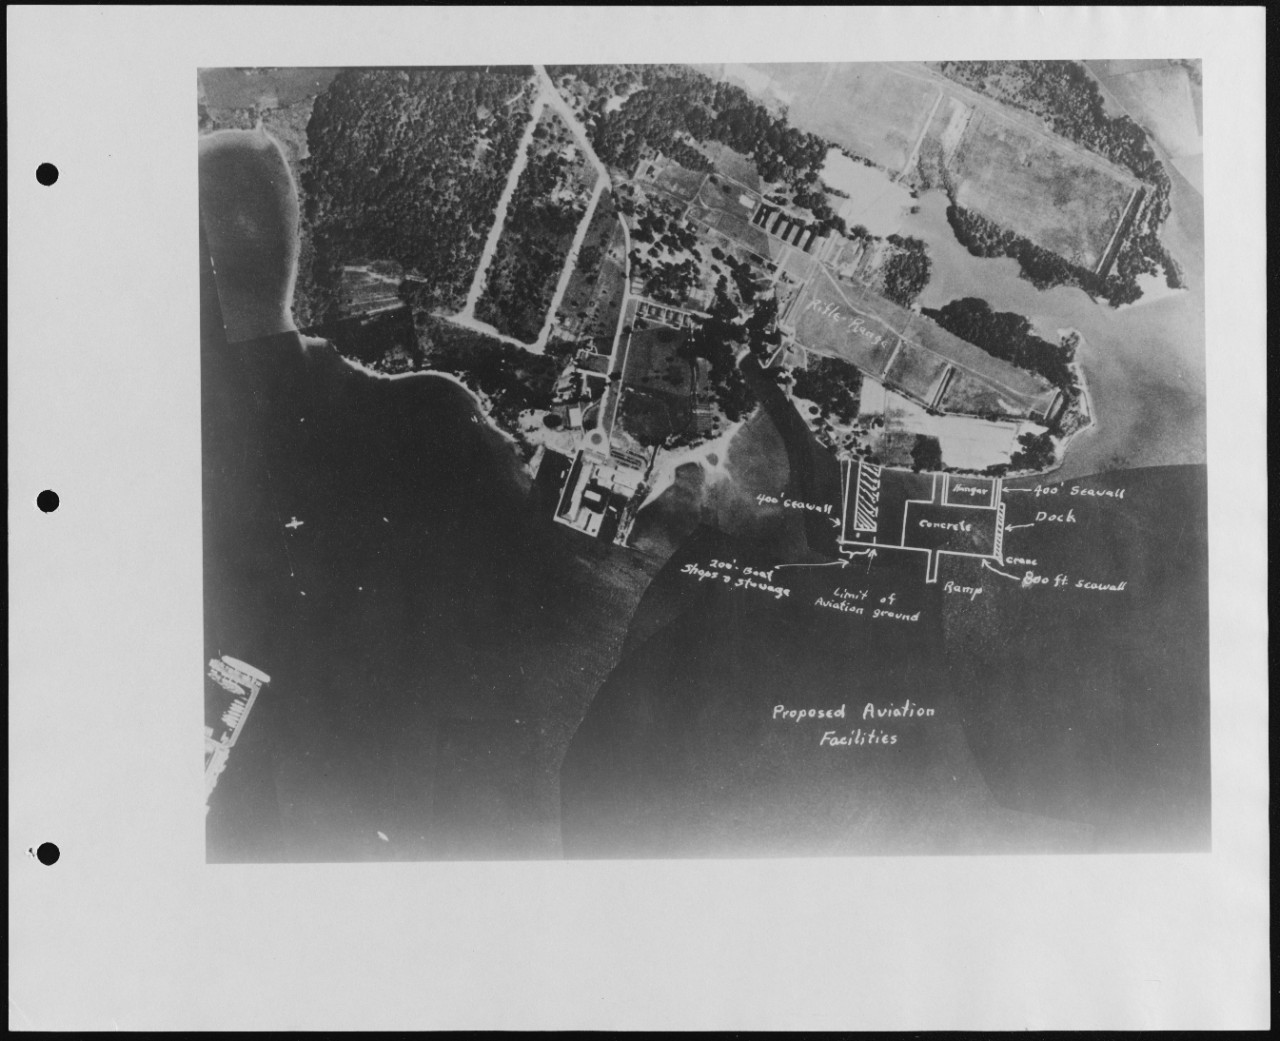 Area for proposed Air Station at U.S. Naval Academy. Anacostia, Washington, D.C.